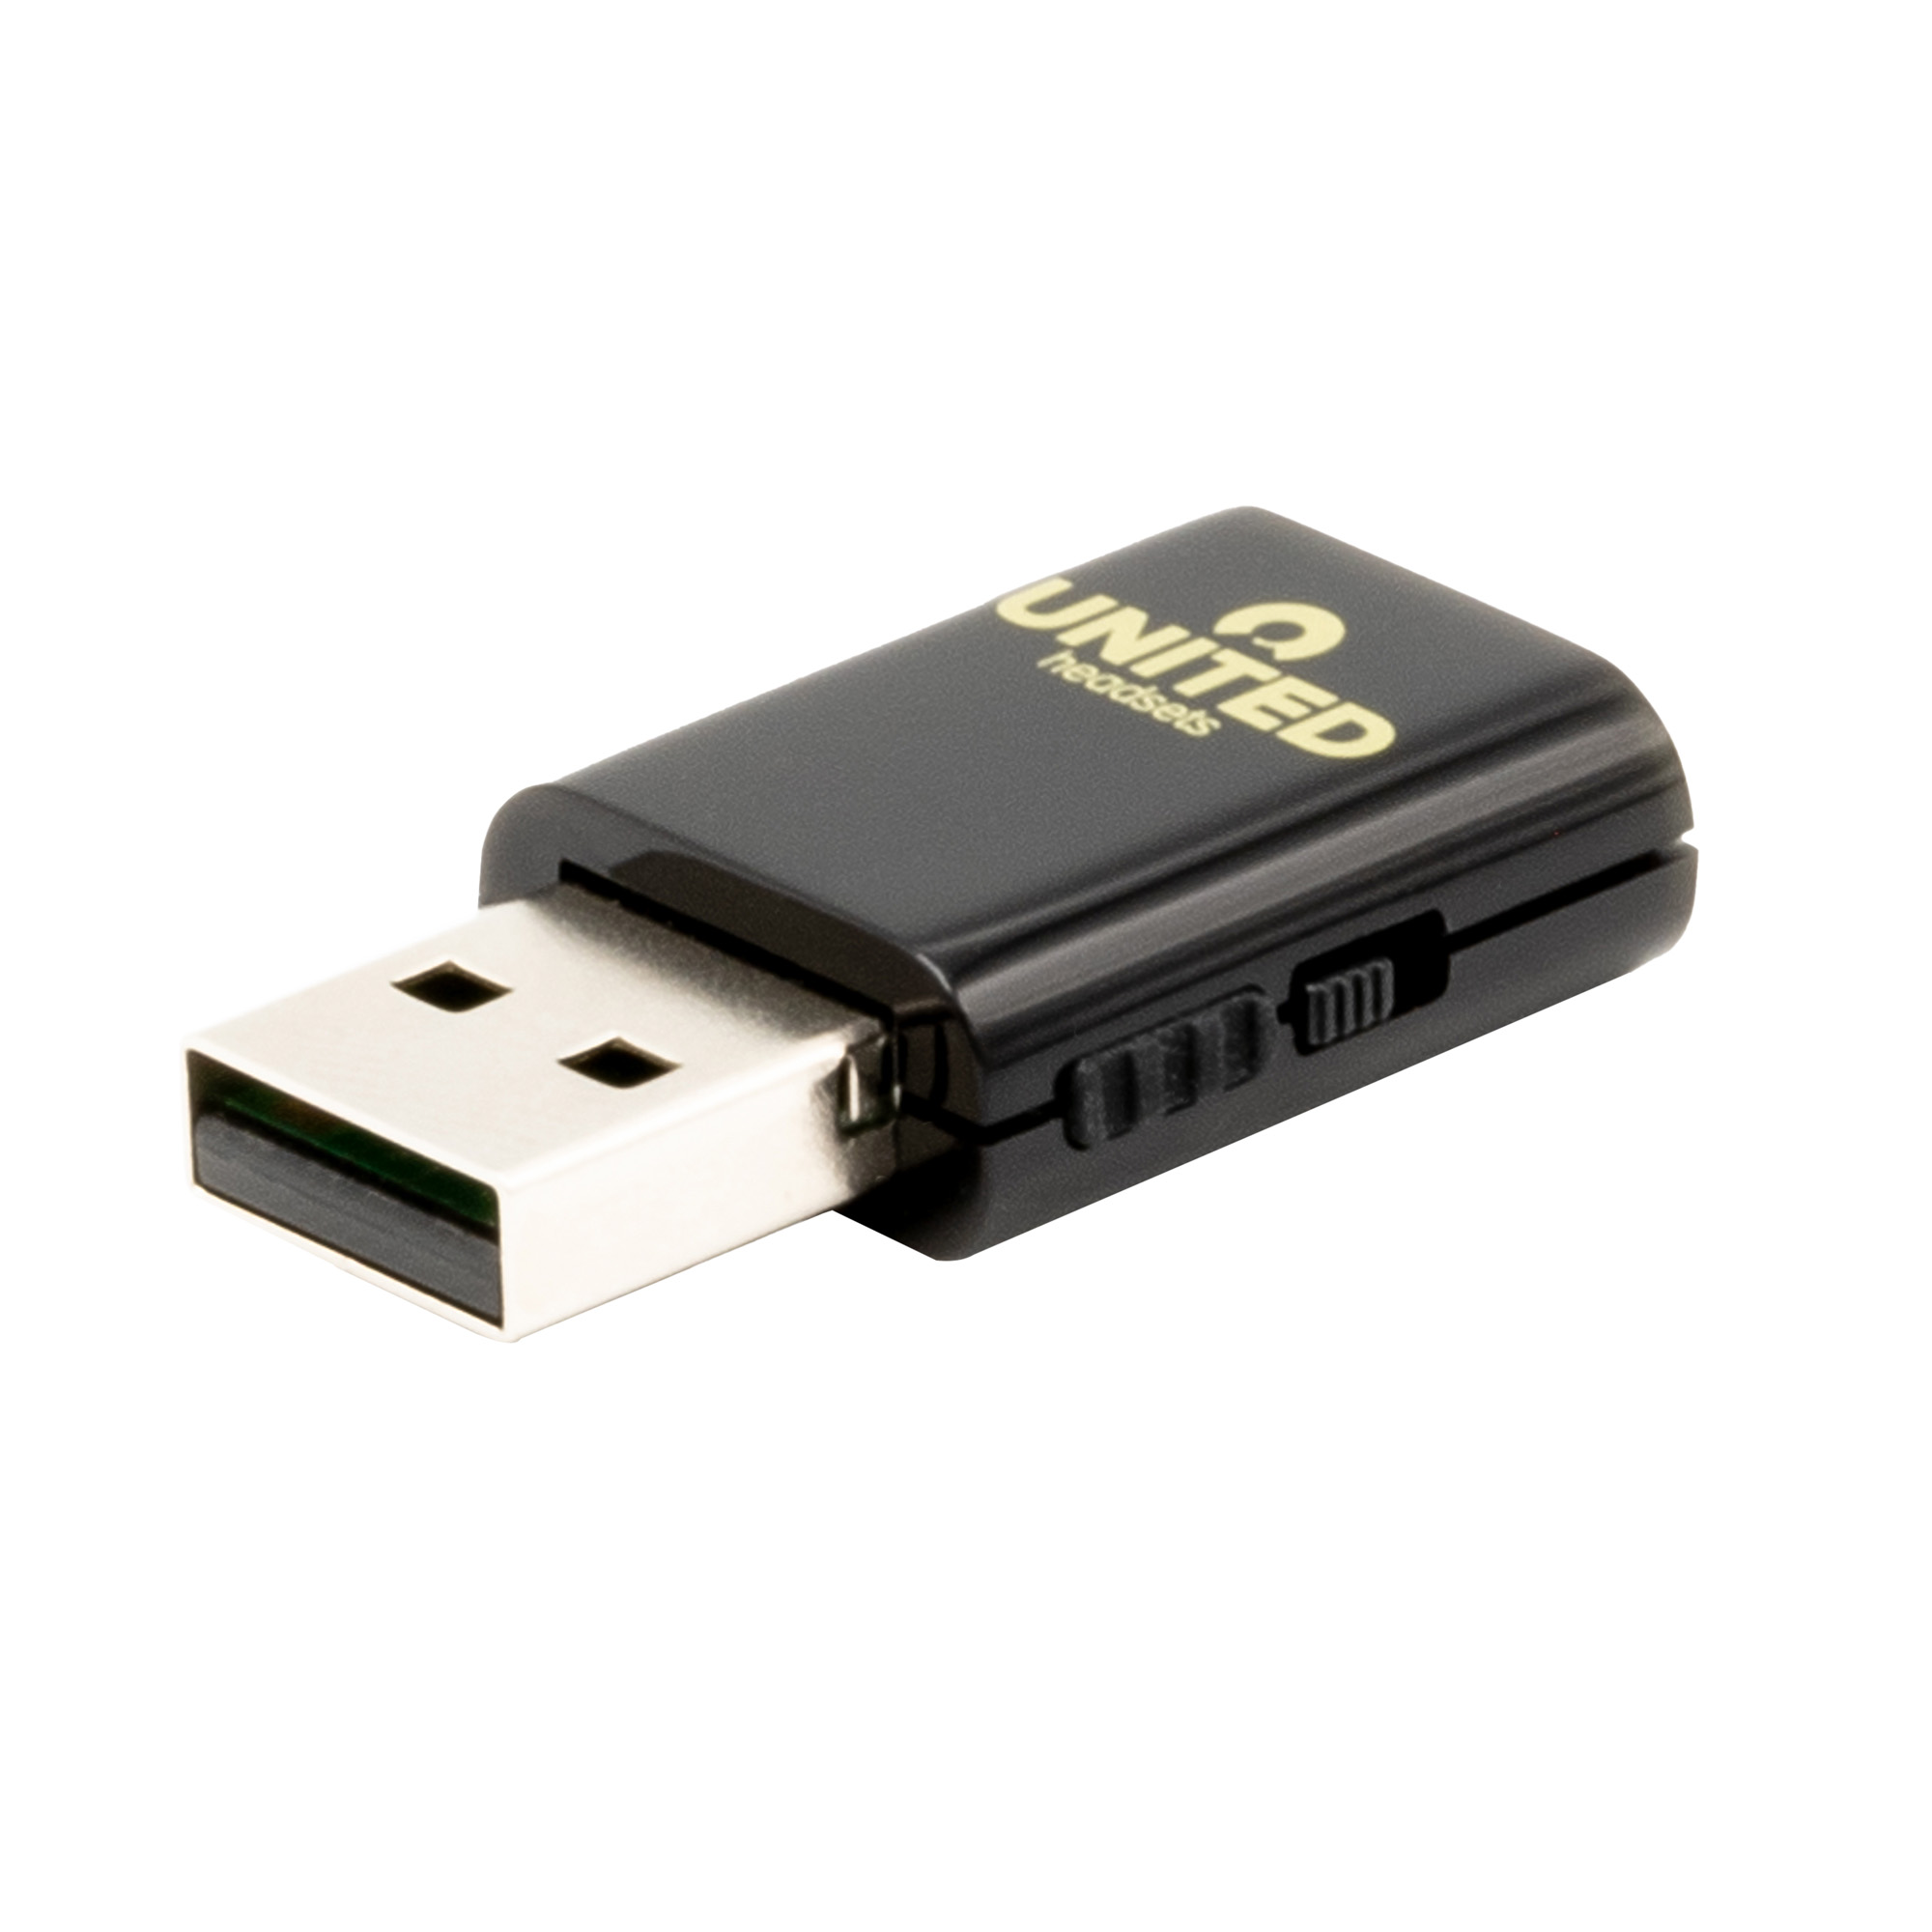 United Headsets Clave DECT USB-A dongle